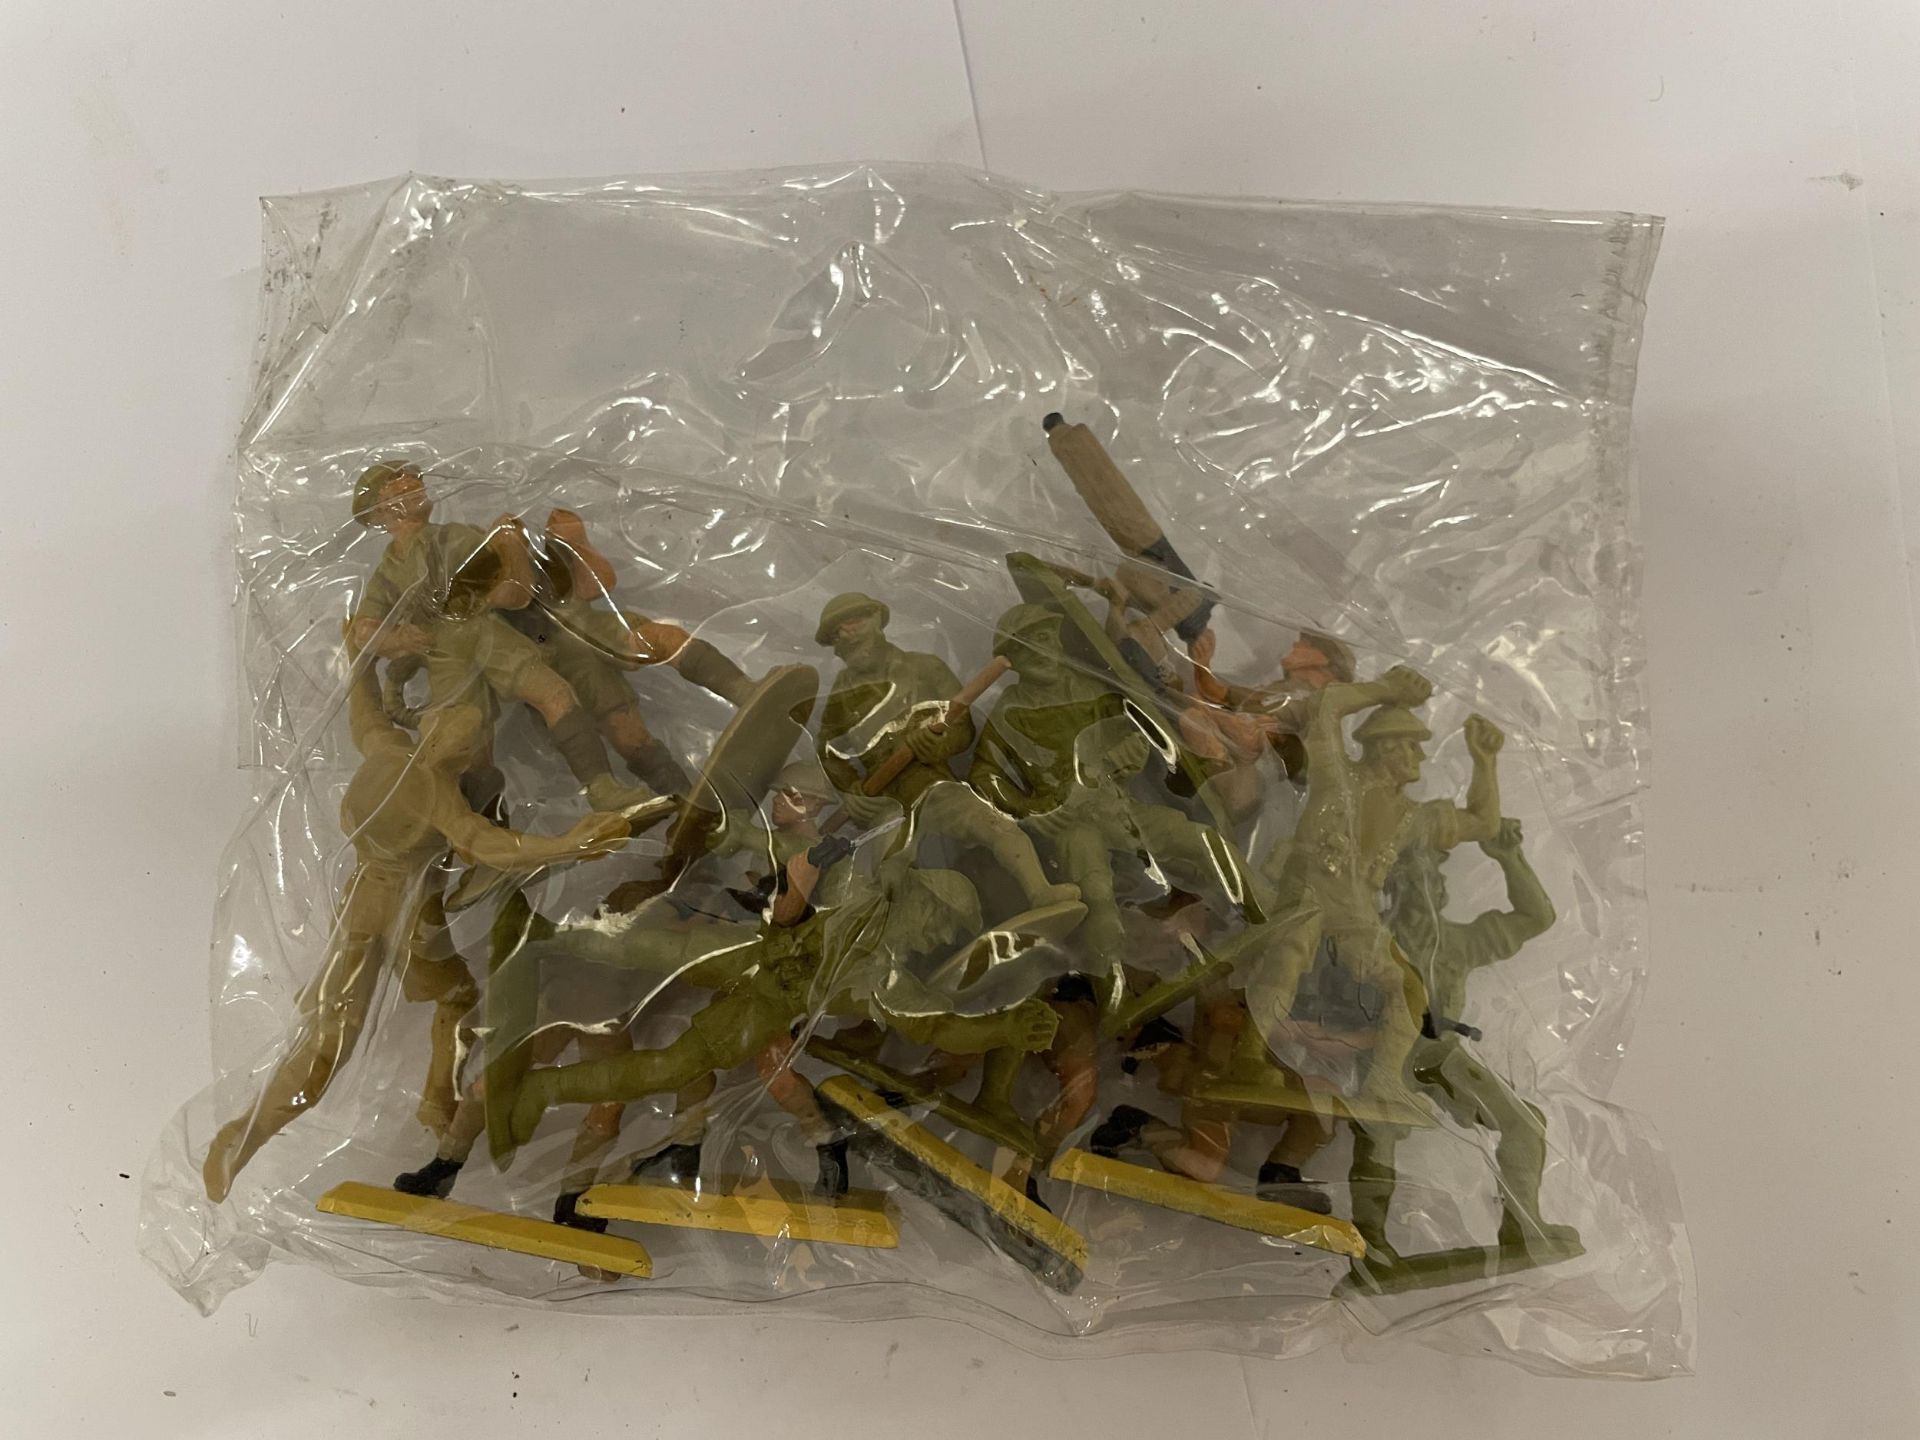 A COLLECTION OF ARMY MEN PLASTIC FIGURES IN BAGS - Image 2 of 3